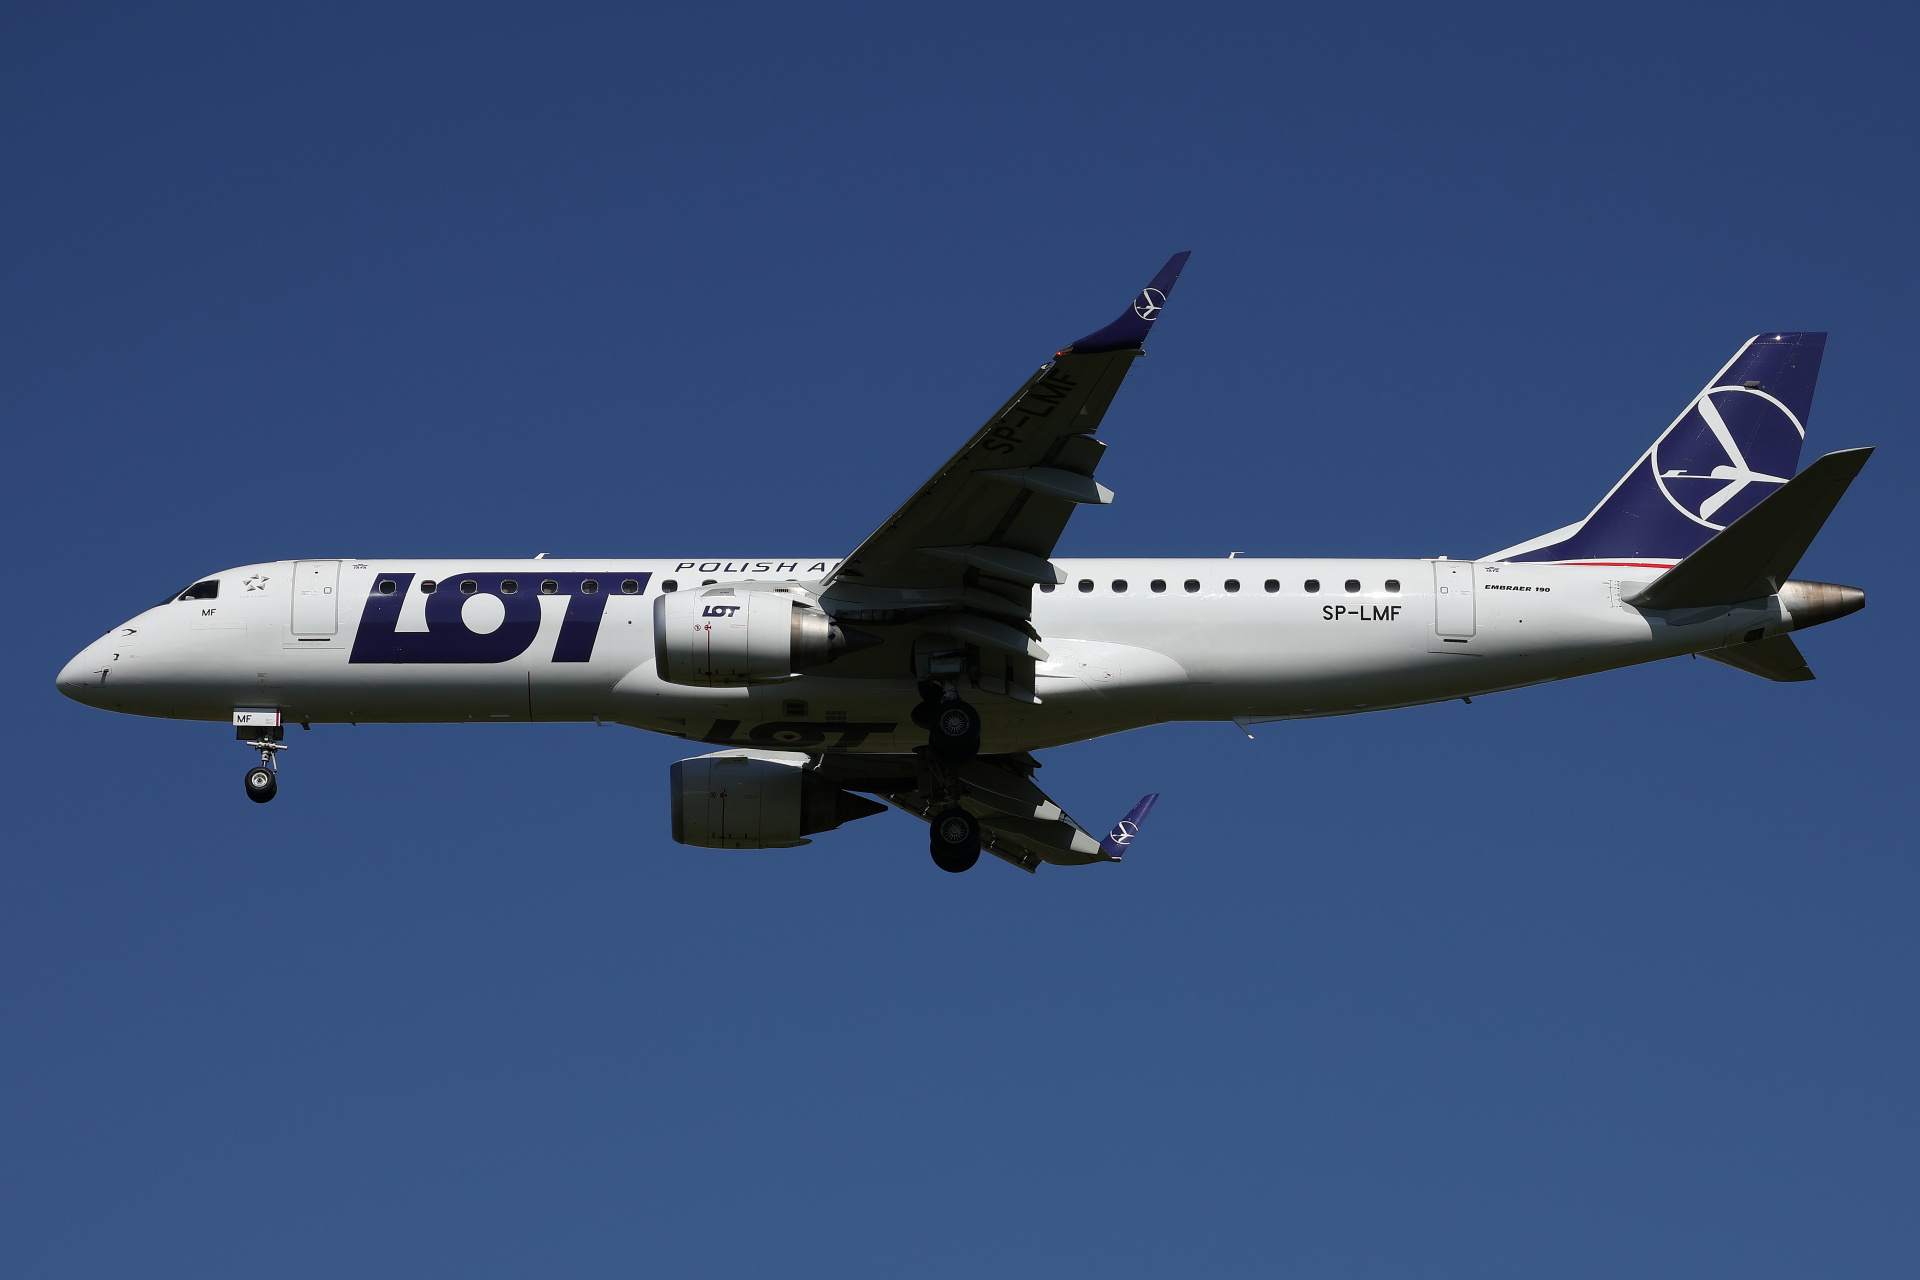 SP-LMF (Aircraft » EPWA Spotting » Embraer E190 » LOT Polish Airlines)